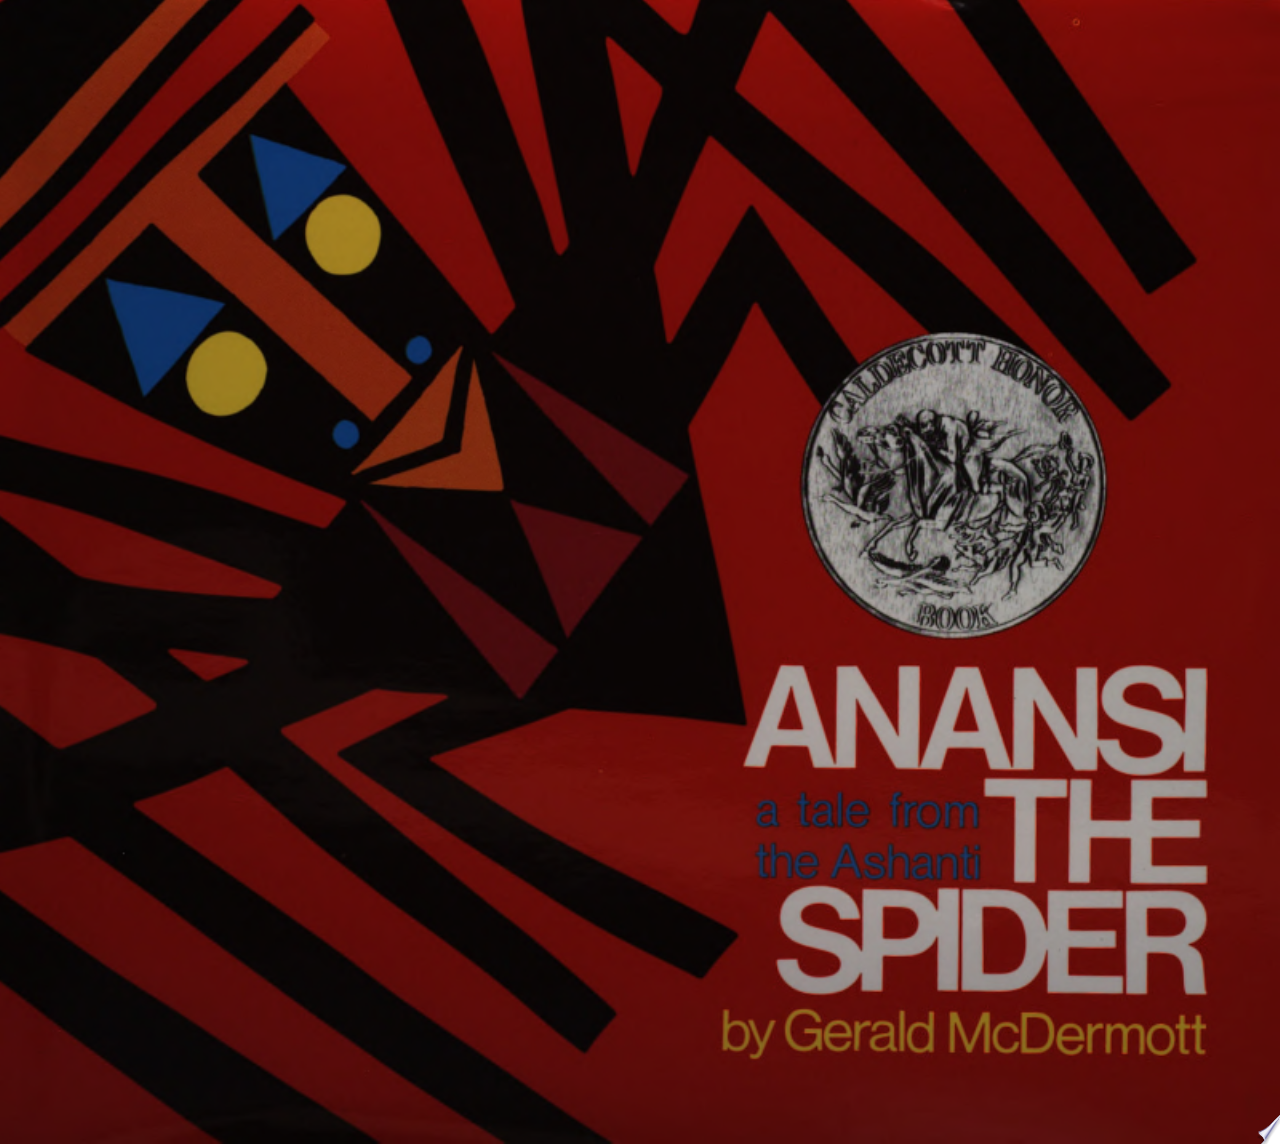 Image for "Anansi the Spider"